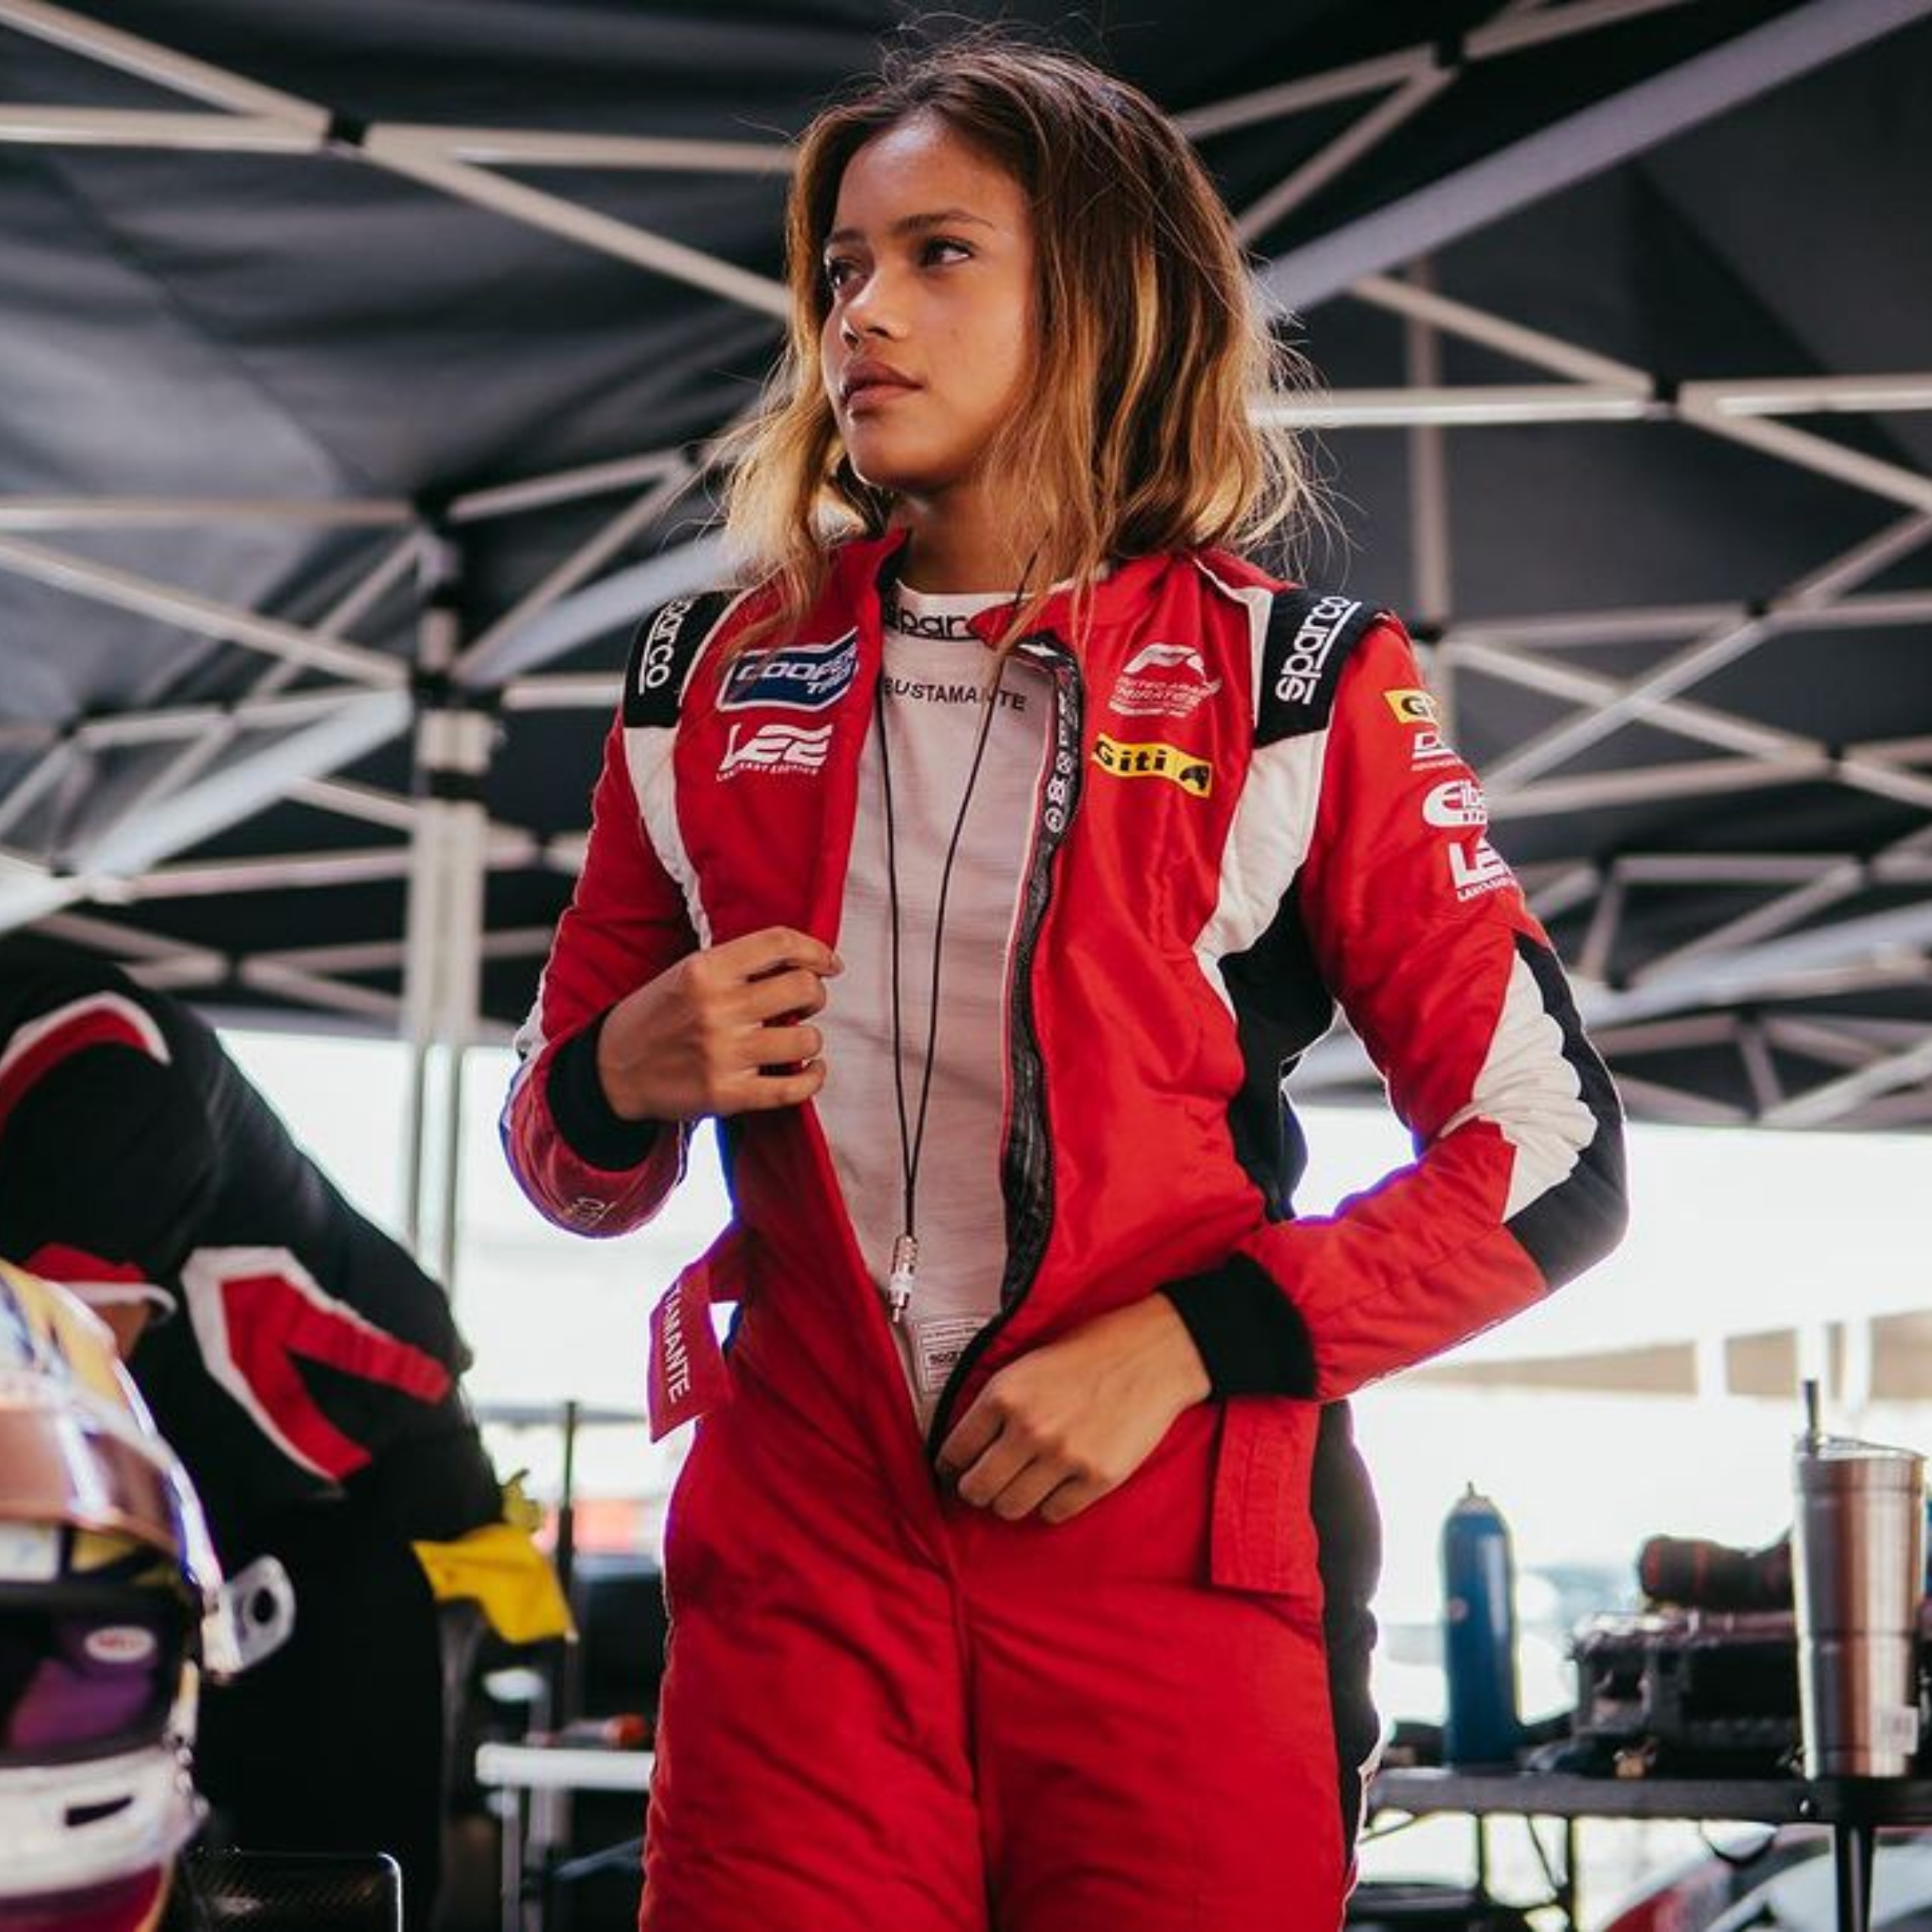 How to Train Like a Professional Racing Driver, According to Bianca Bustamante